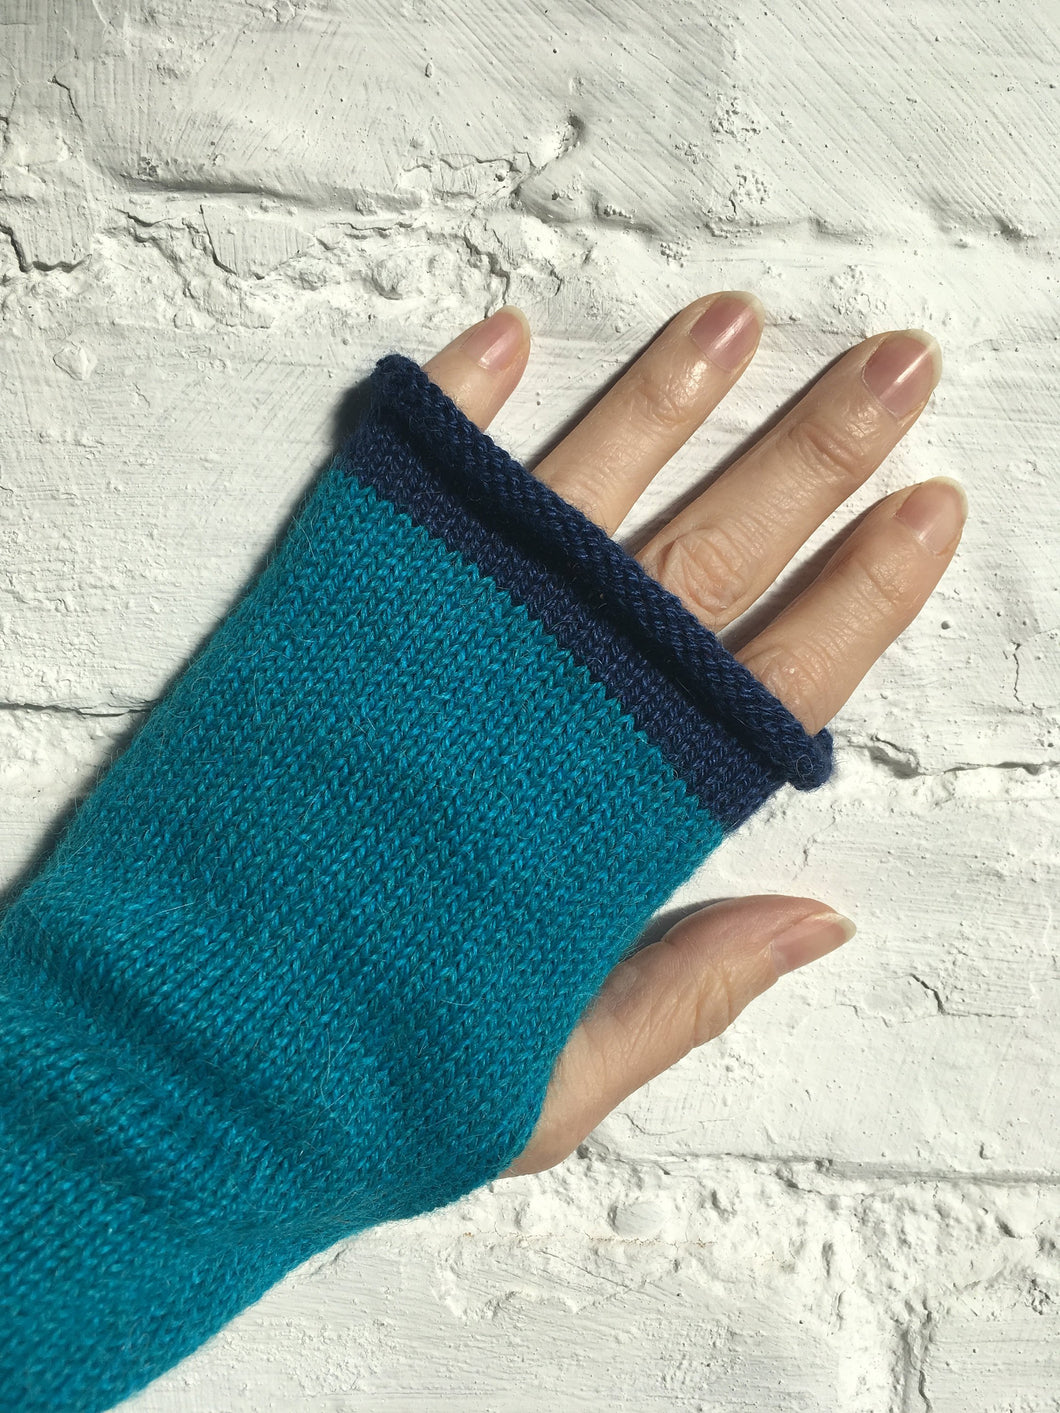 Turquoise Blue Fingerless Alpaca Gloves with Navy Trim and Slit for Thumb by Lord and Taft